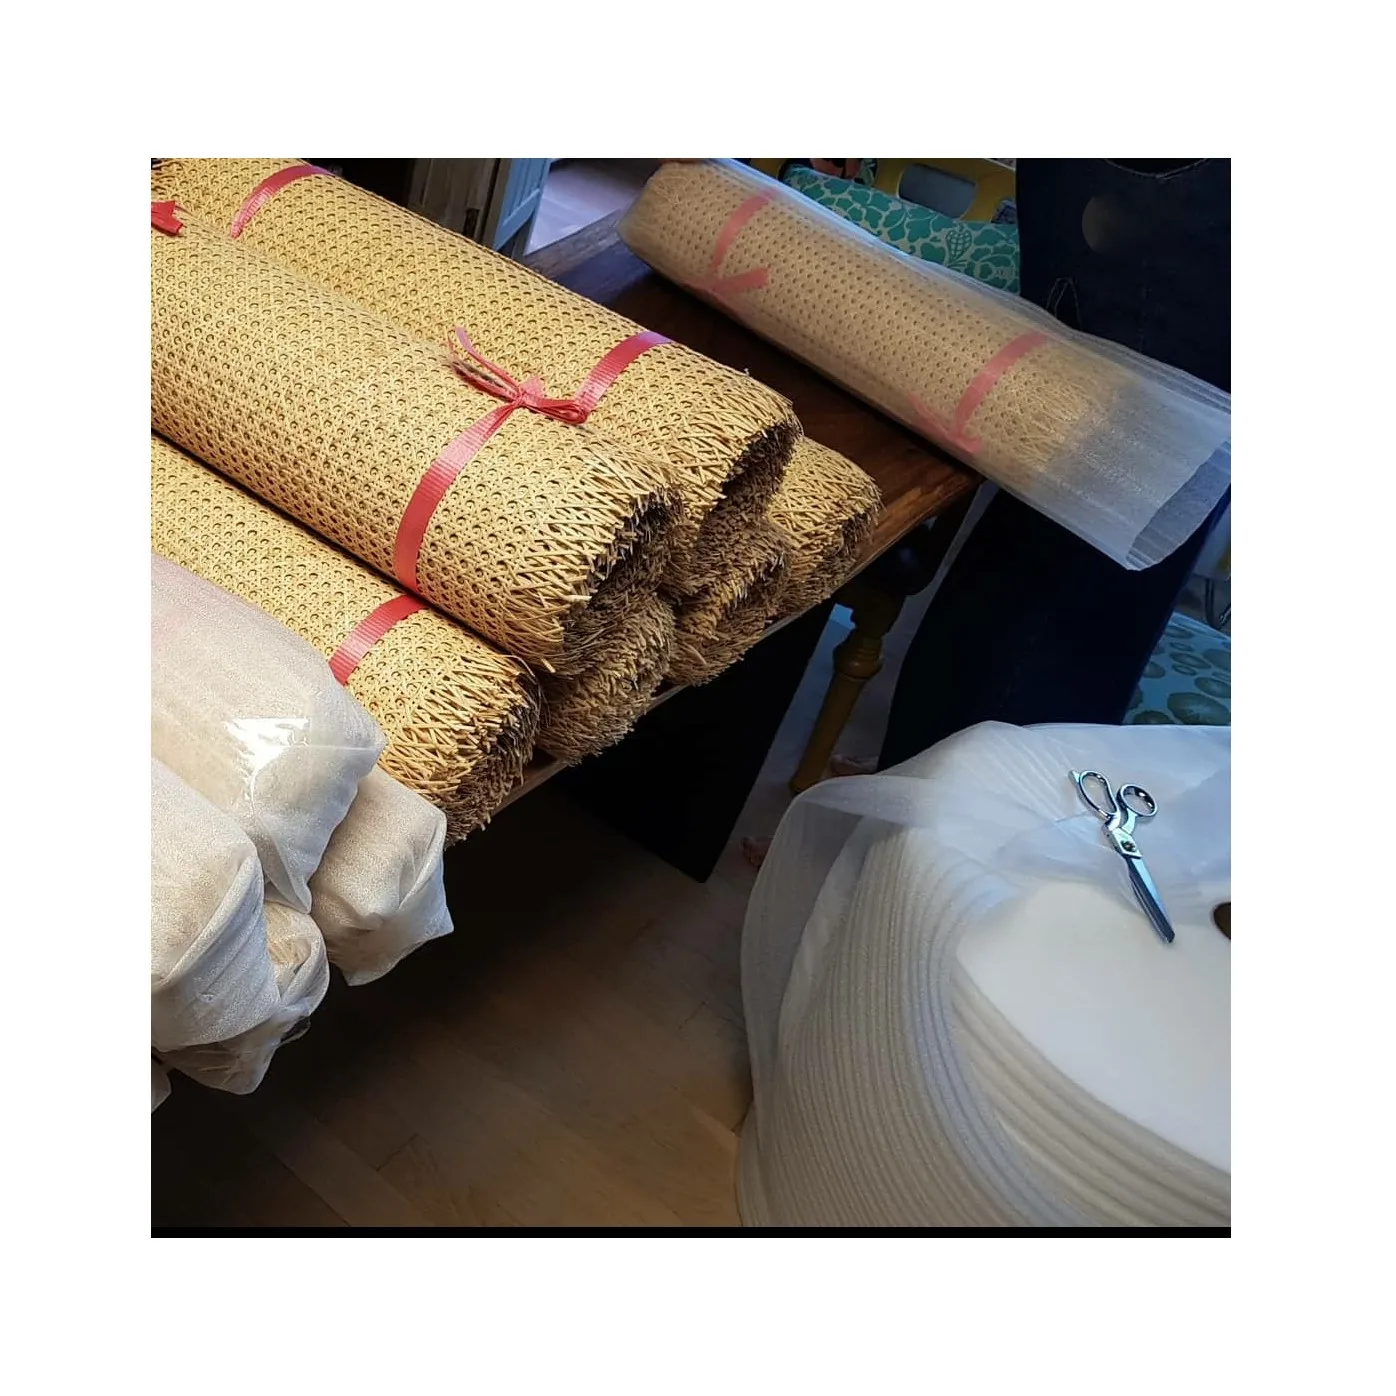 Rattan Cane Webbing- Rattan Material Buyer- Rattan Cane Webbing Roll  [Ws0084587176063] - Buy Rattan Cane Webbing- Rattan Material Buyer- Rattan  Cane Webbing Roll [Ws0084587176063] Product on